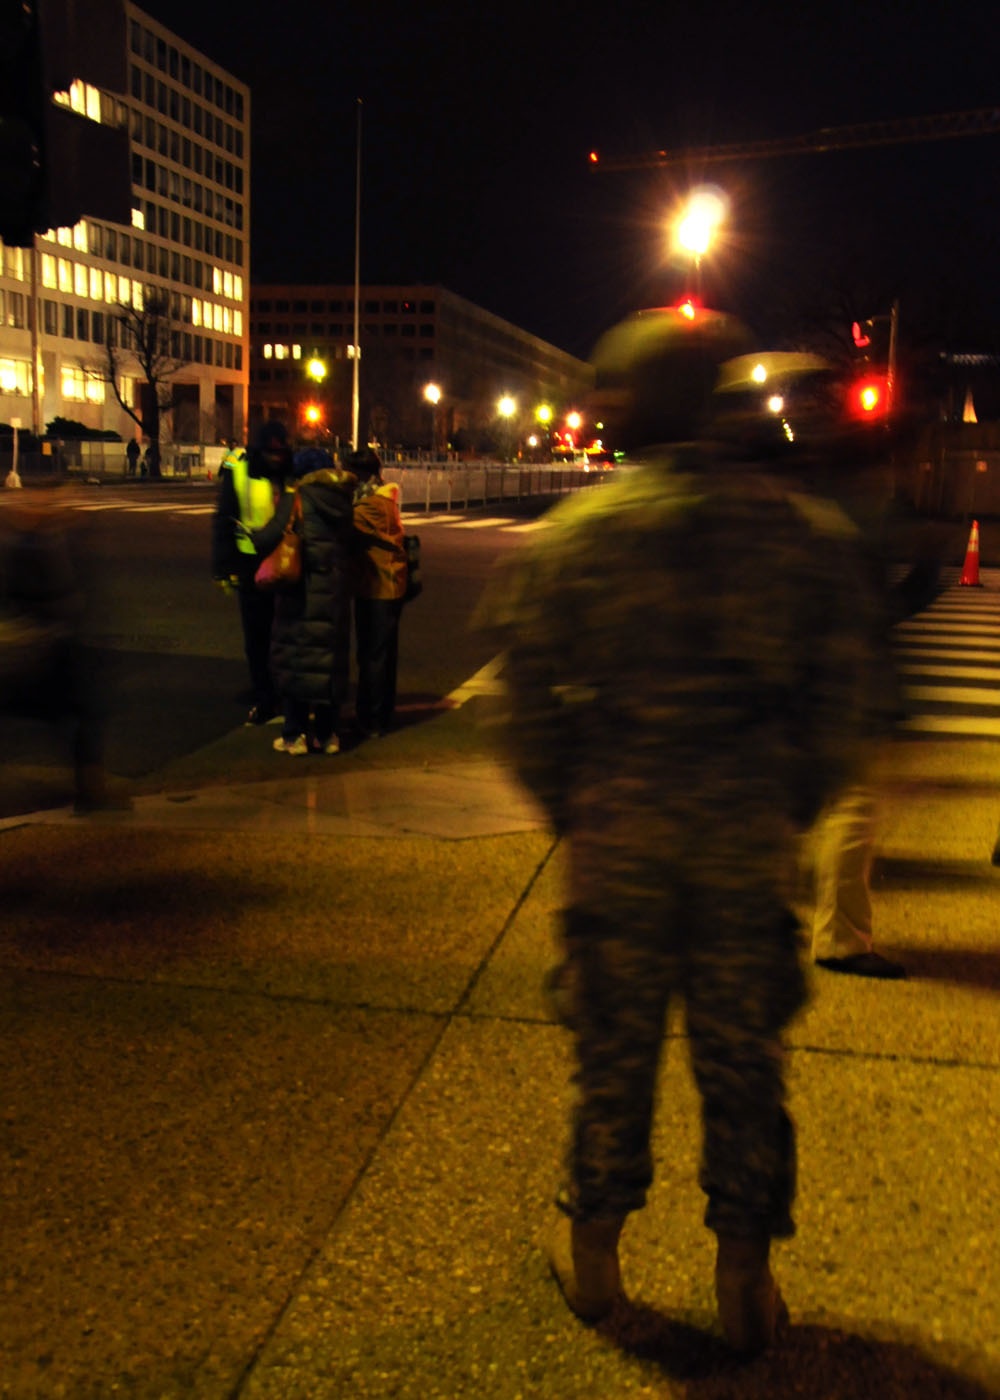 National Guard members assist local agencies with crowd control, direction during 2013 Presidential Inauguration